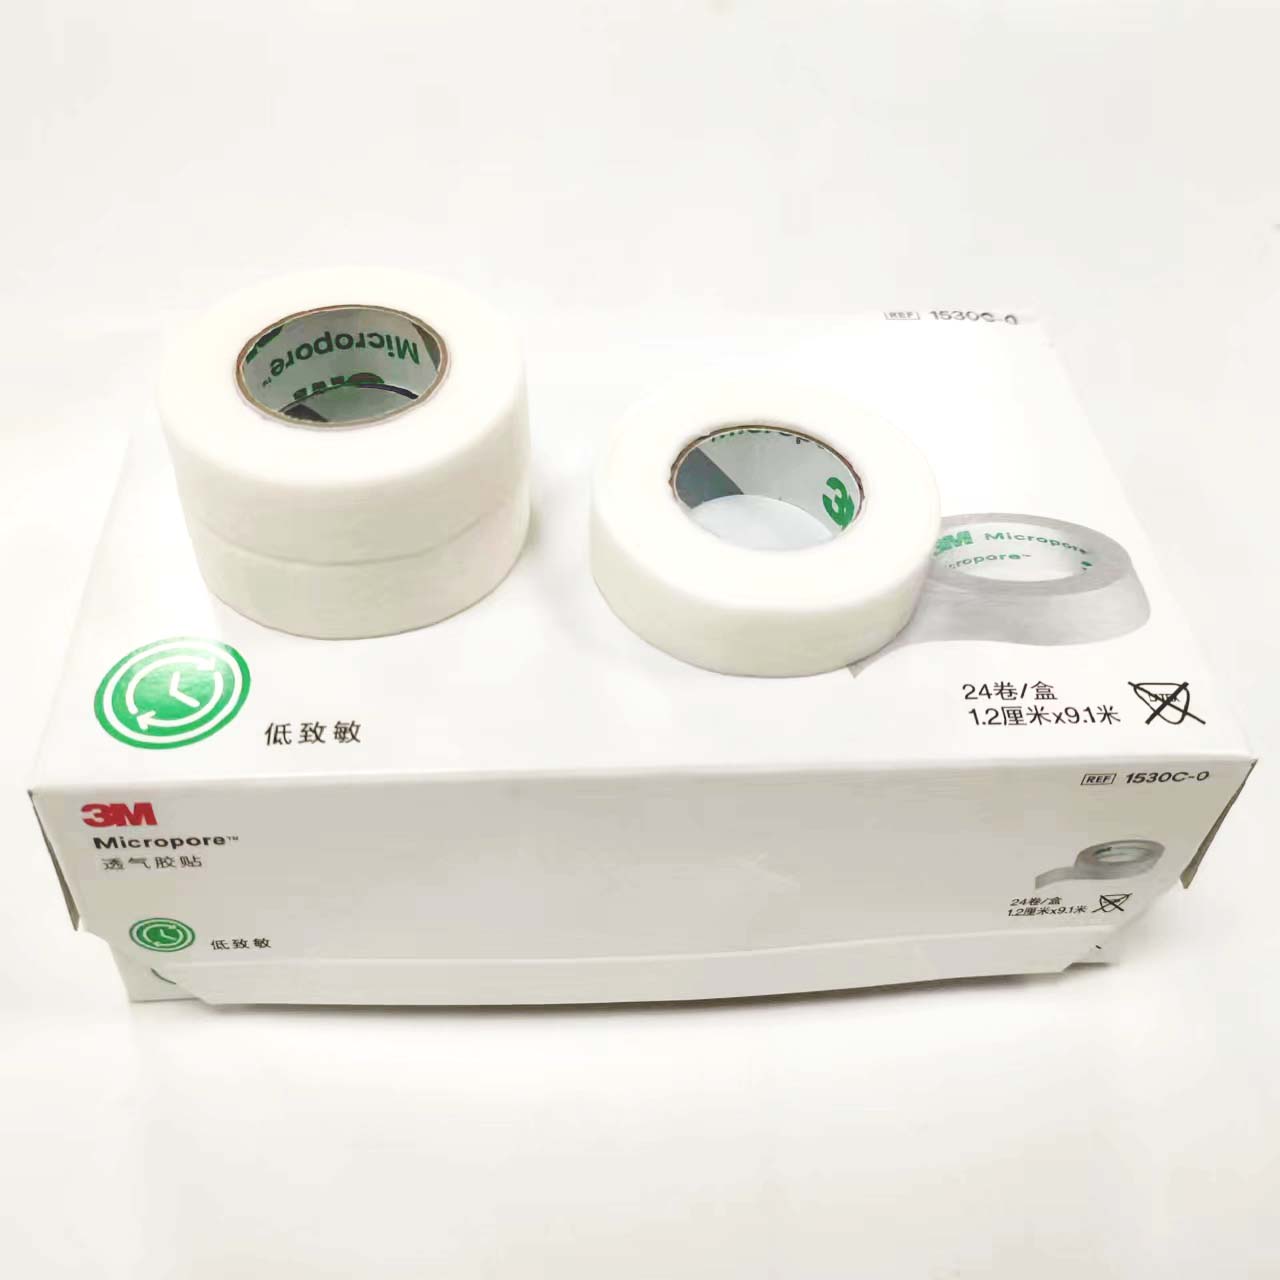 3M Micropore Surgical Tape 1530 Series